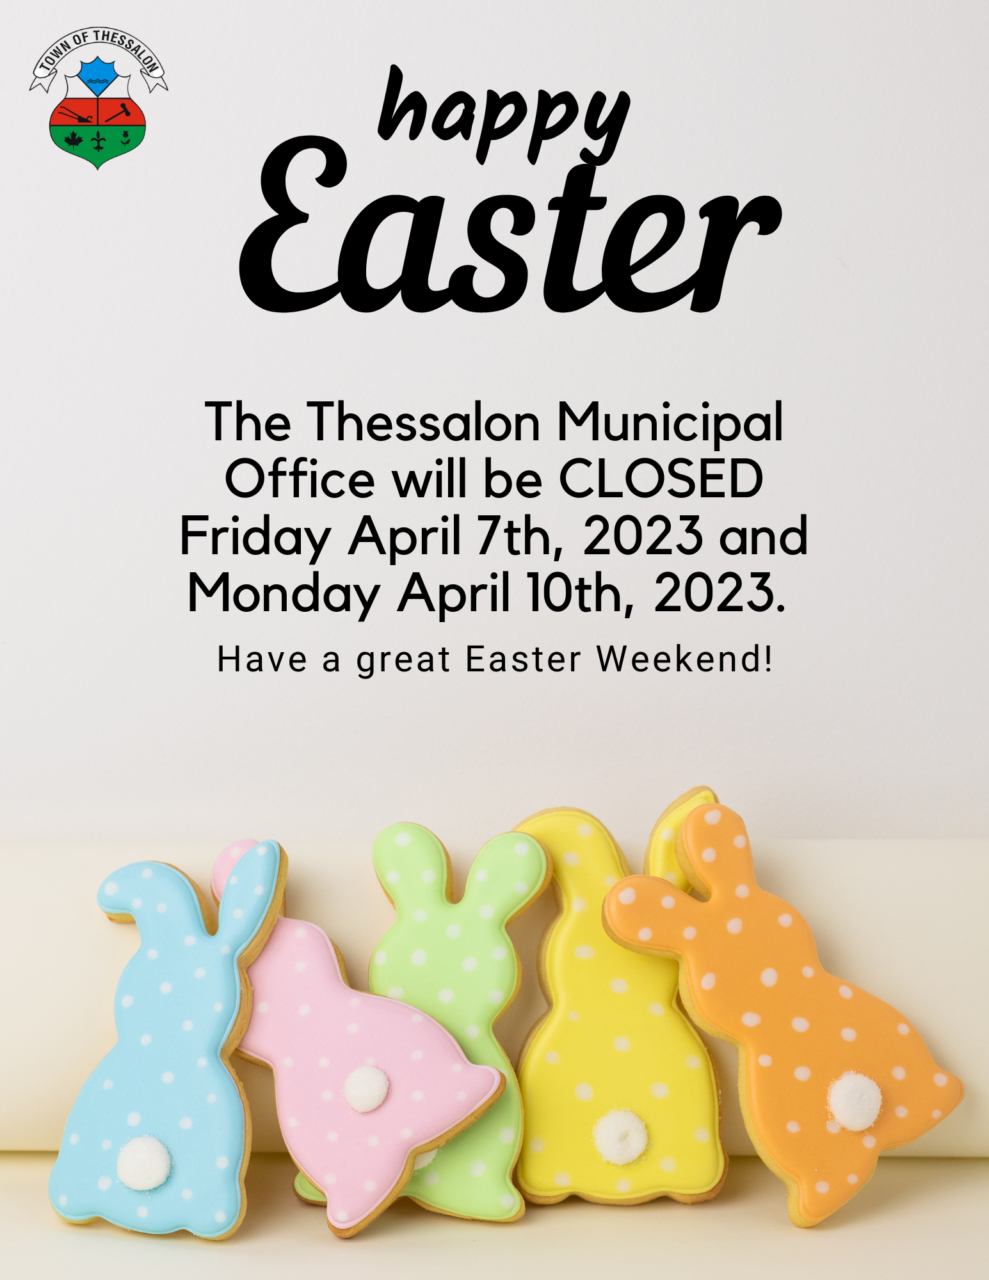 Municipal Office will be closed Friday April 7th and Monday April 10th, 2023. Happy Easter
